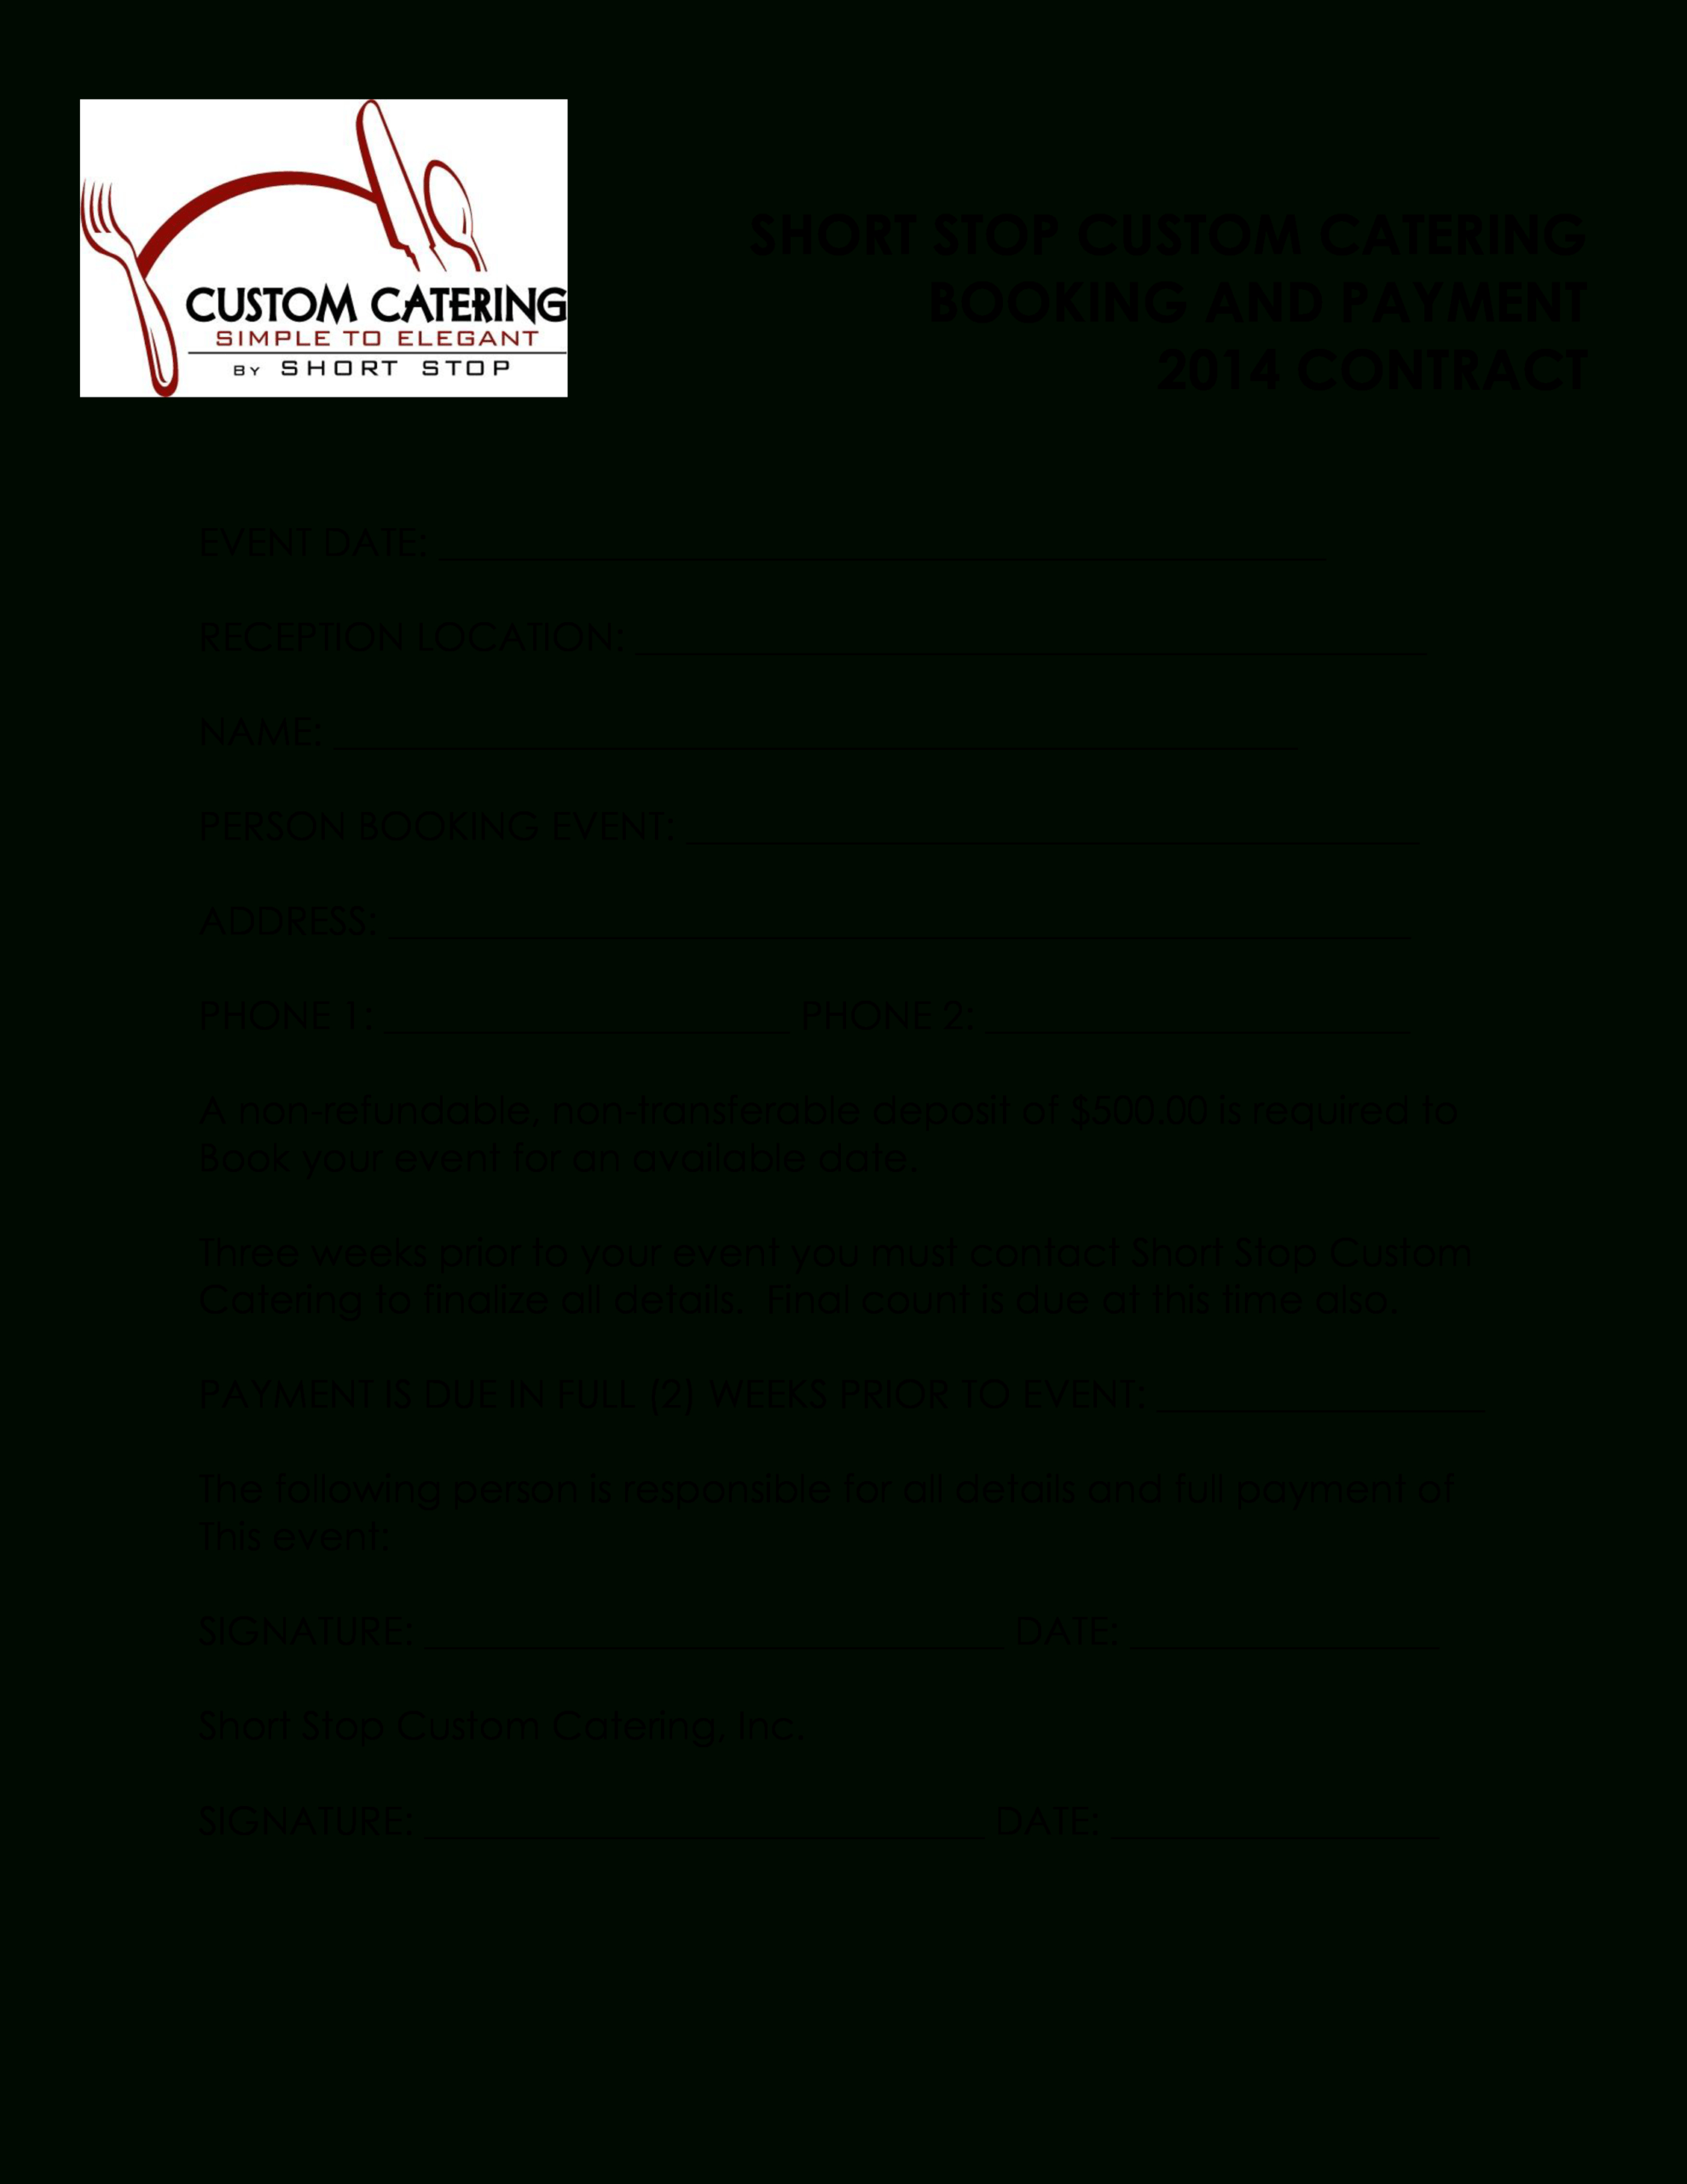 011 Catering Contract Template Free Ideas 2Eebed085048 1 Intended For Catering Contract Template Word